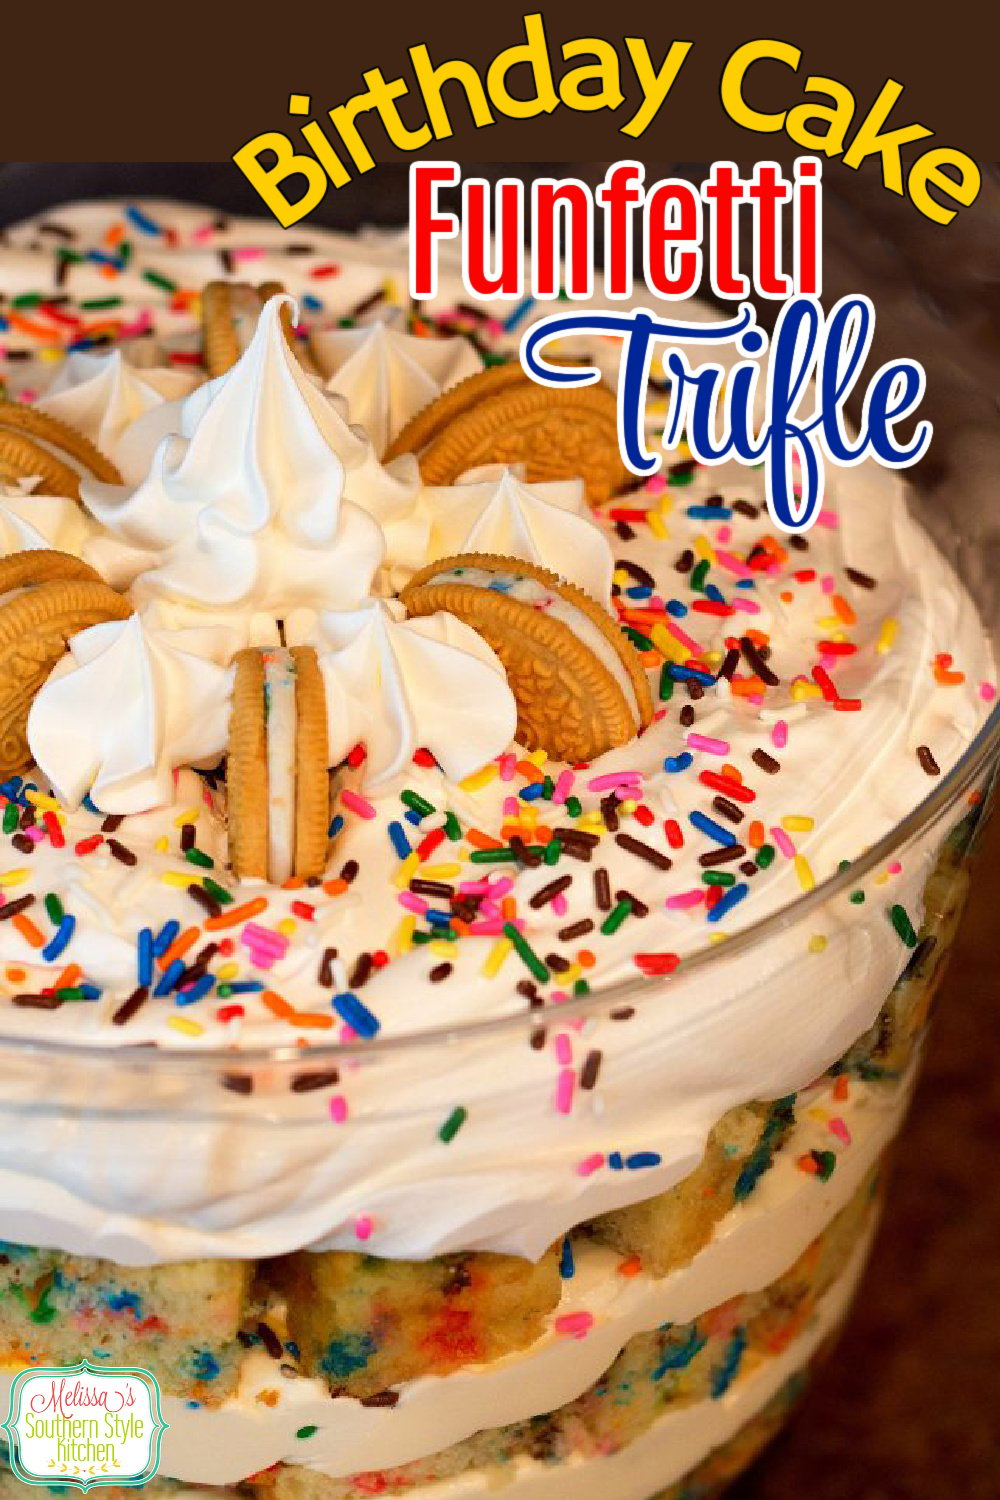 This colorful and delicious Birthday Cake Funfetti Trifle is the perfect excuse to party like it's your birthday any day of the year #funfettitrifle #funfetti #triflerecipes #southernrecipes #birthdaycake #partyfood #cakes #cakerecipes via @melissasssk